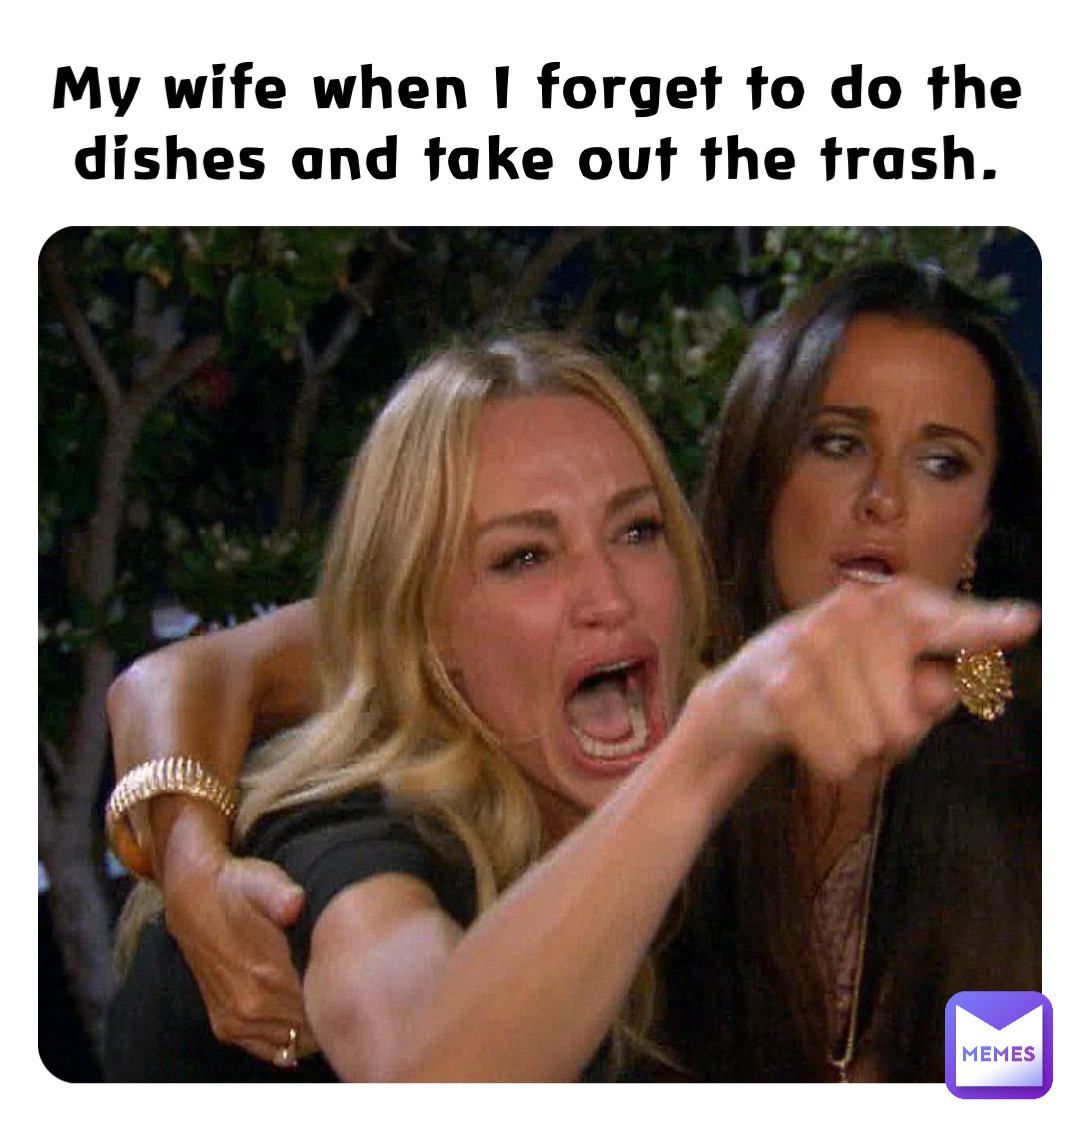 My wife when I forget to do the dishes and take out the trash.